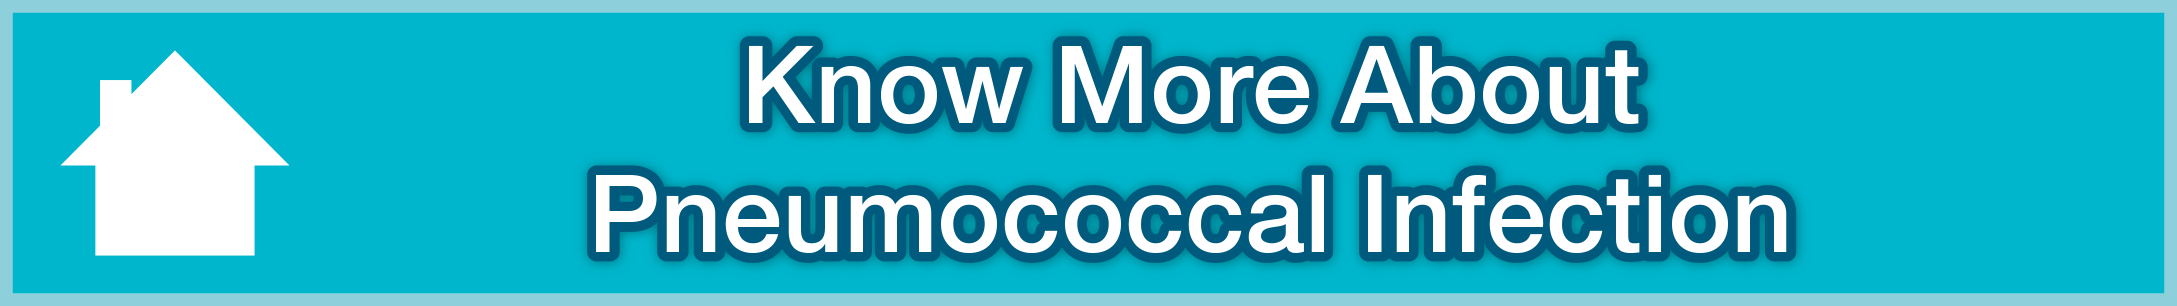 Know More About Pneumococcal Infection